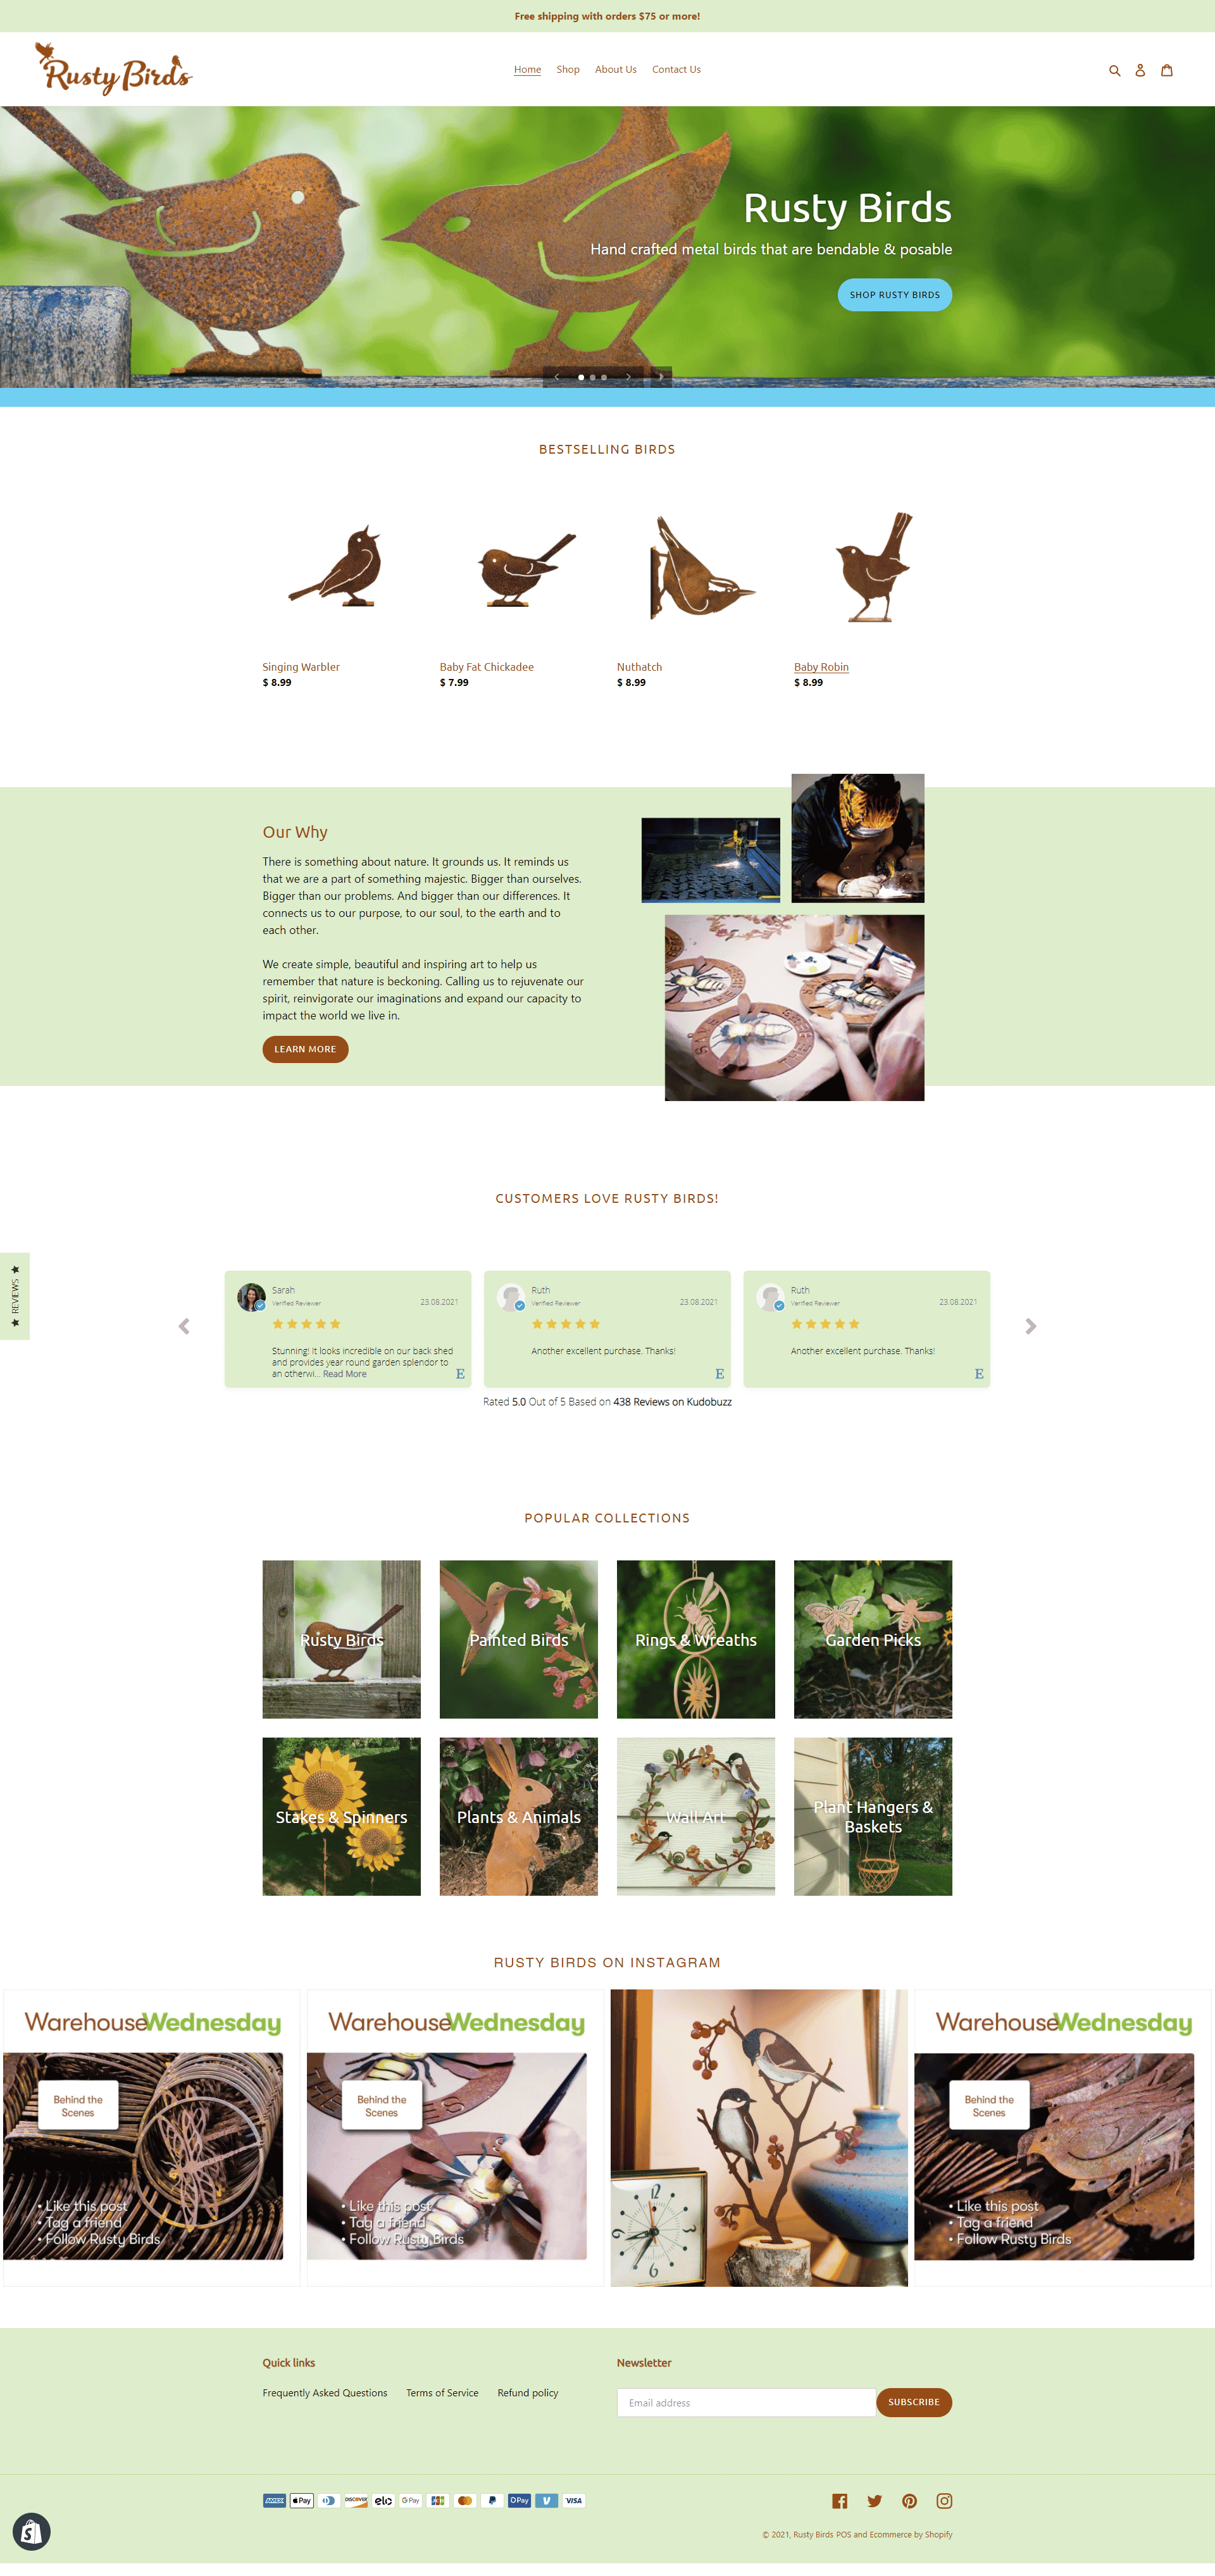 Rusty Birds website redesign by Suffolk County Webmasters